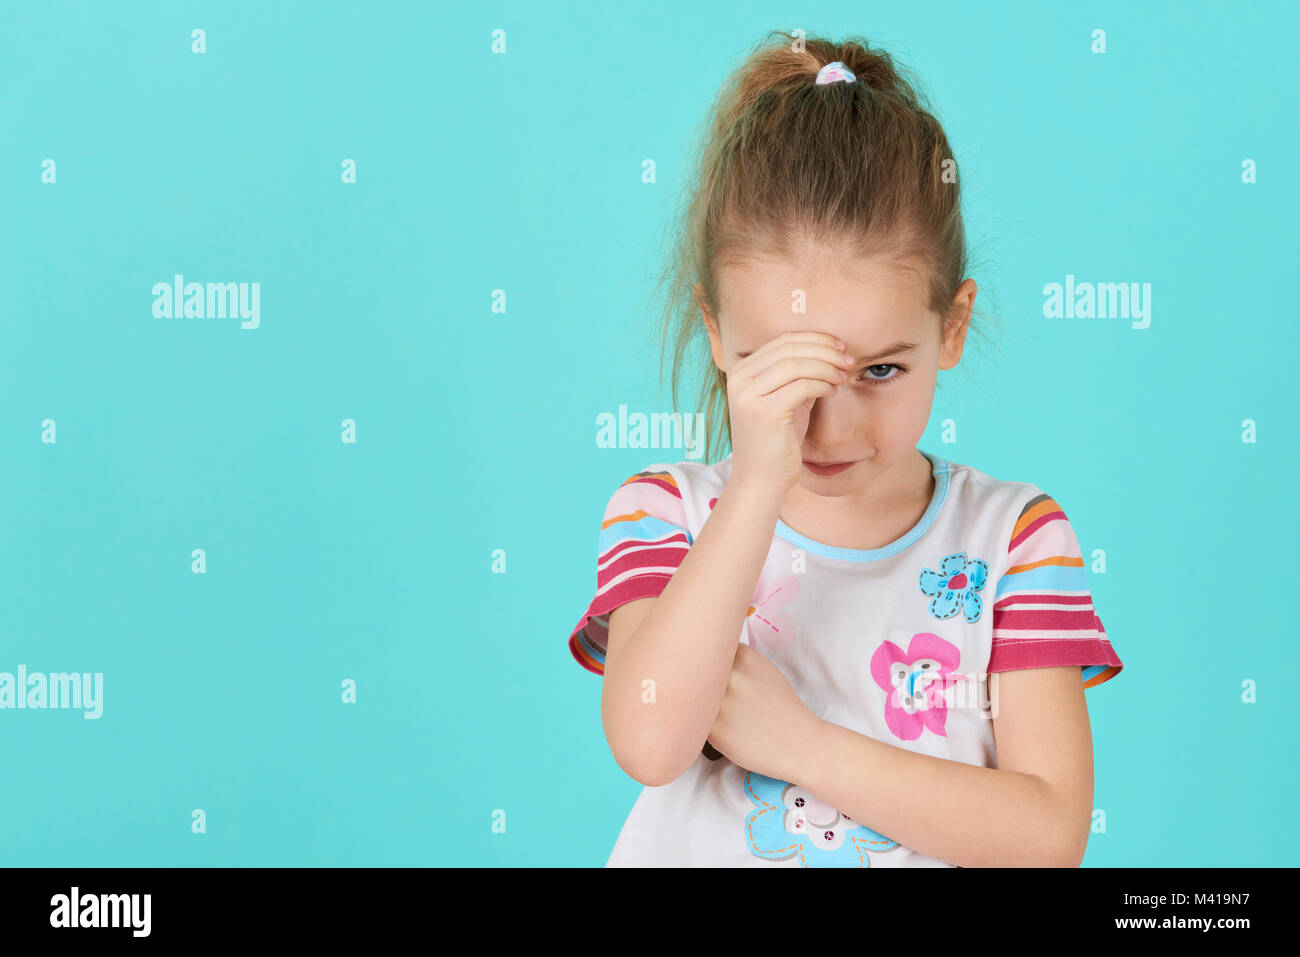 Upset problem child with head in hands. Bullying, depression, stress or frustration concept. Angry little girl background with copy space. Stock Photo